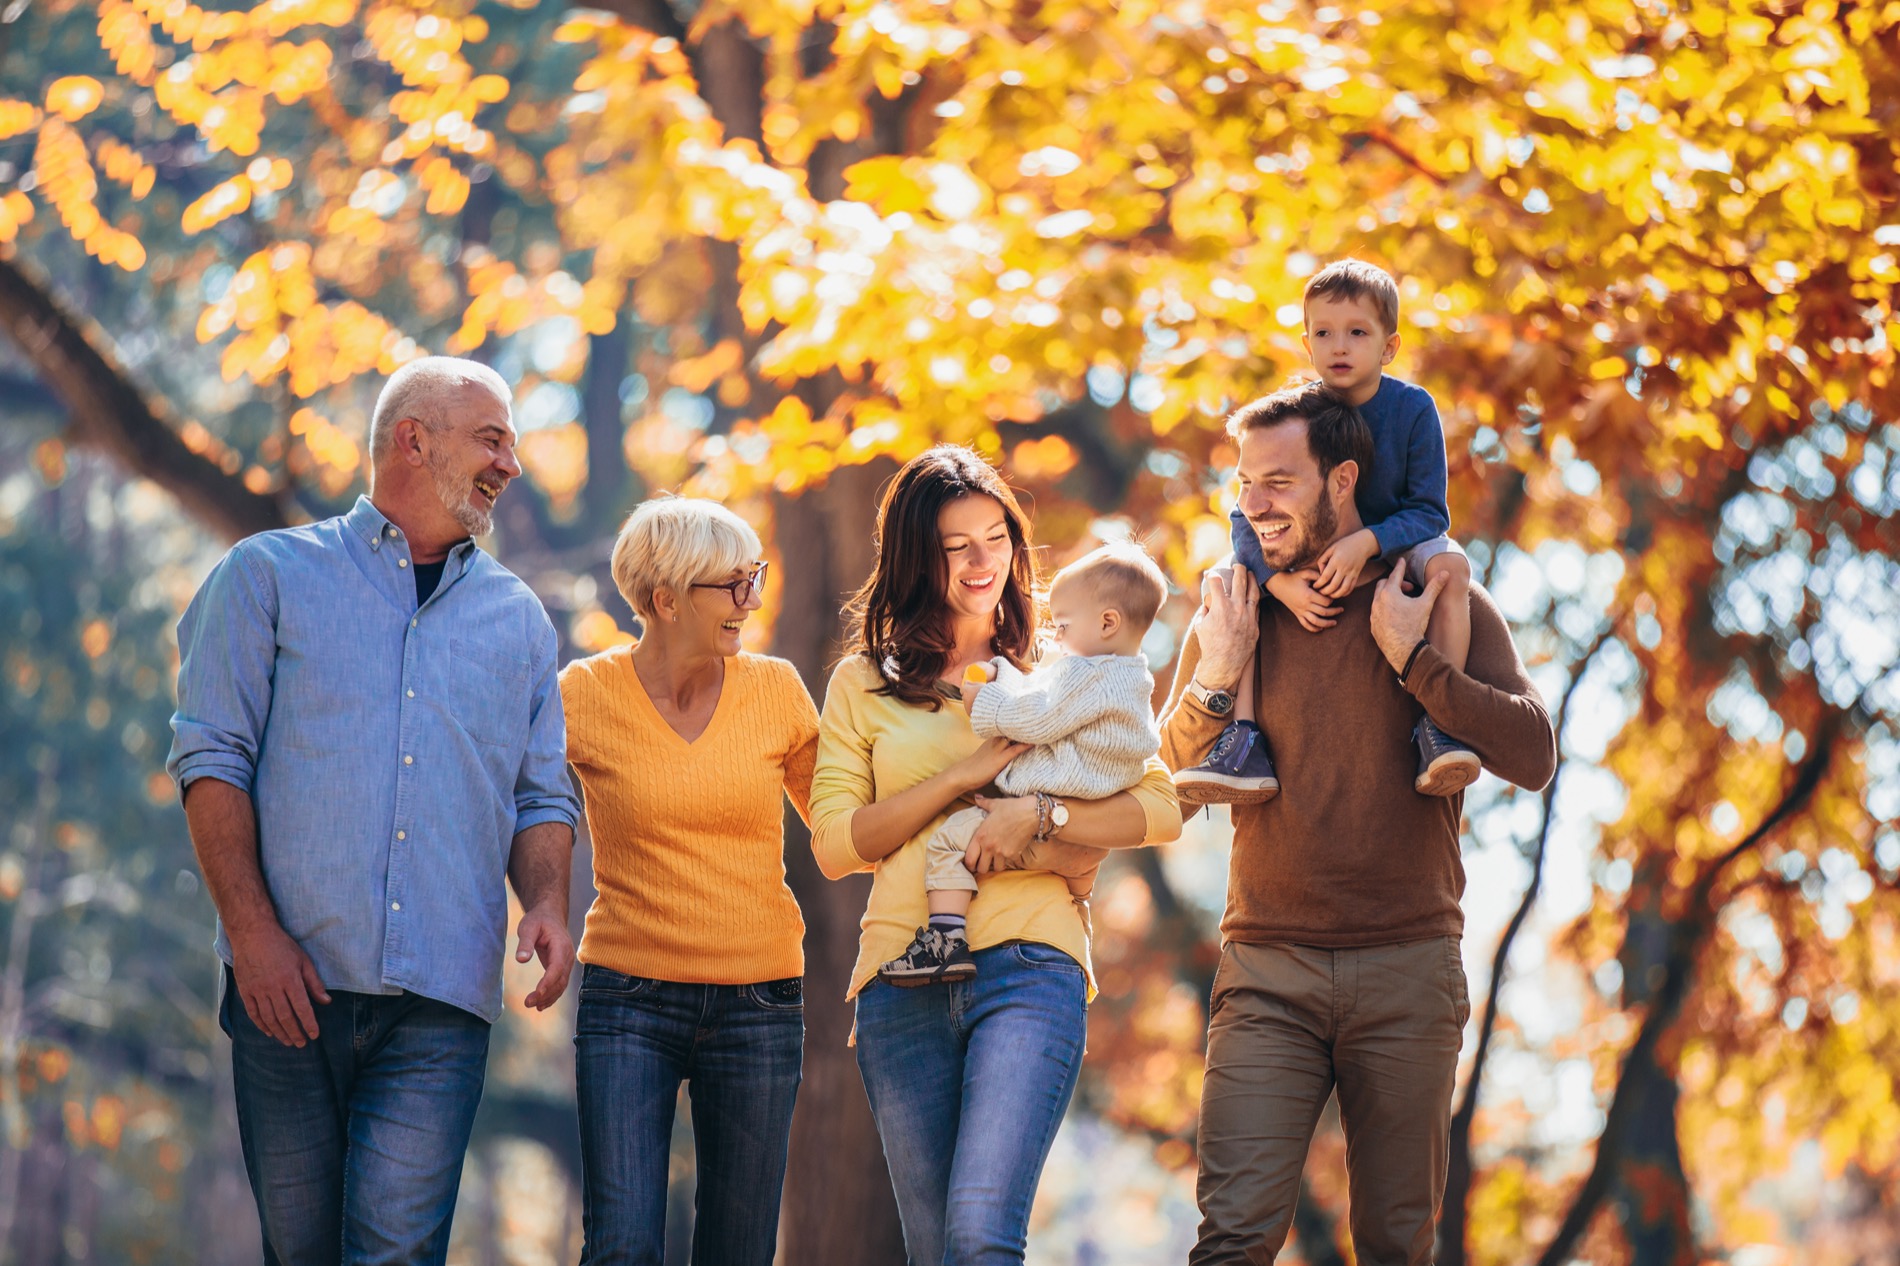 Multi-generational family walking together in the park in autumn.